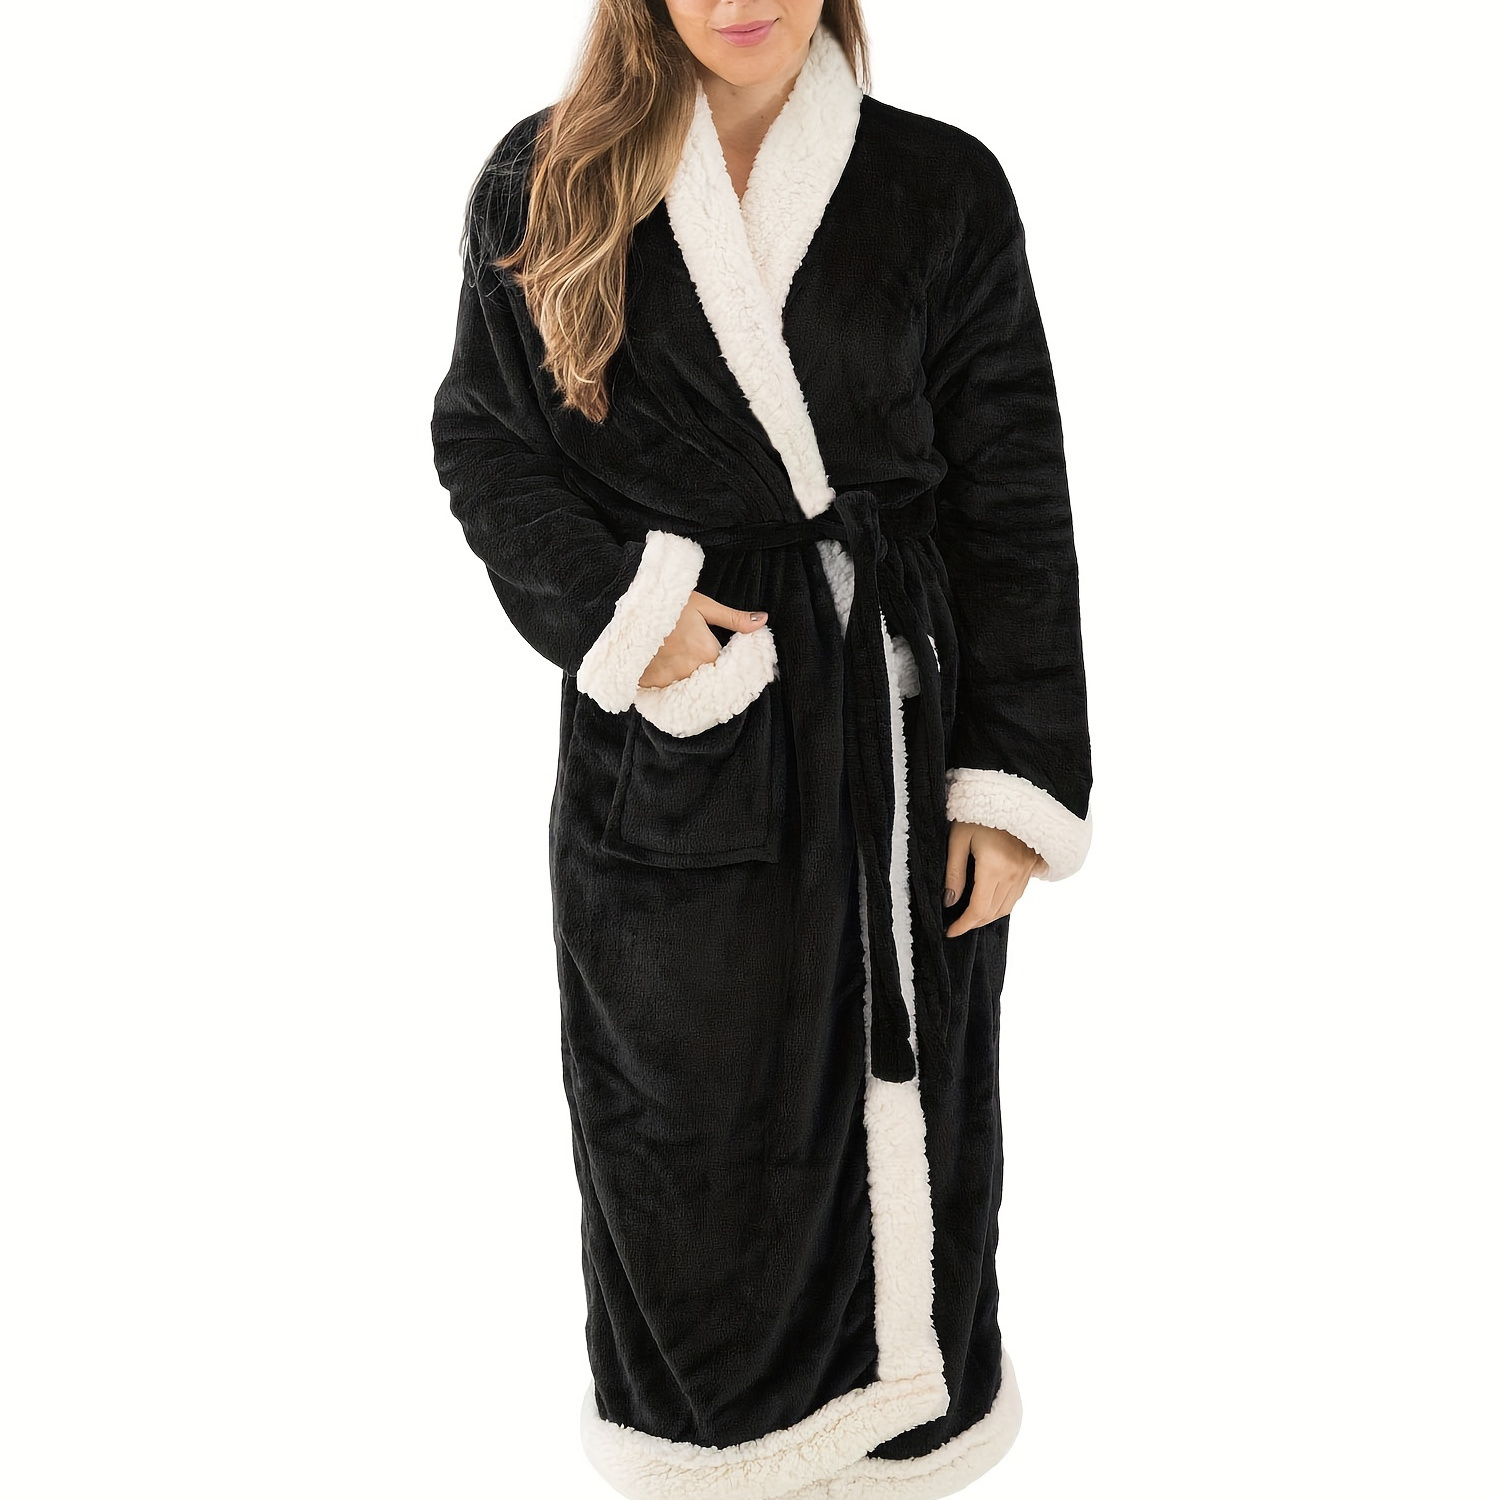 

Women's Long Plush Bathrobe, Elegant Solid Color Robe With Pockets, Cozy Loungewear, Warm Wraparound Comfort For Home Spa For Fall/ Winter